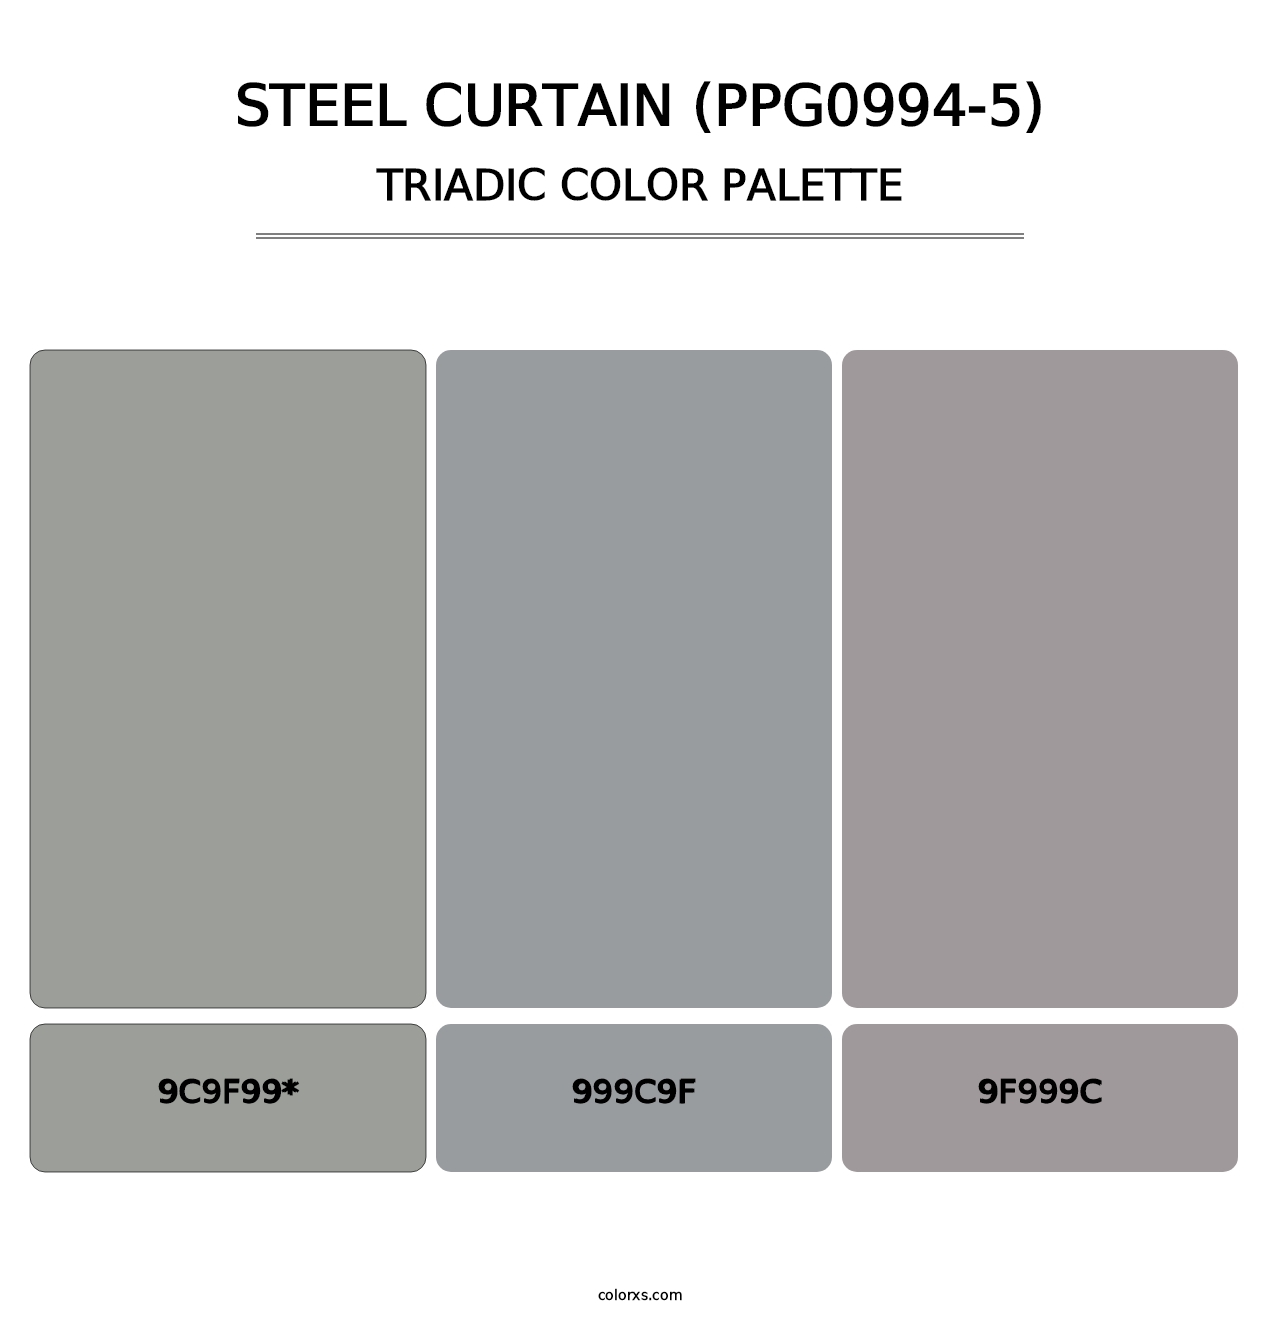 Steel Curtain (PPG0994-5) - Triadic Color Palette